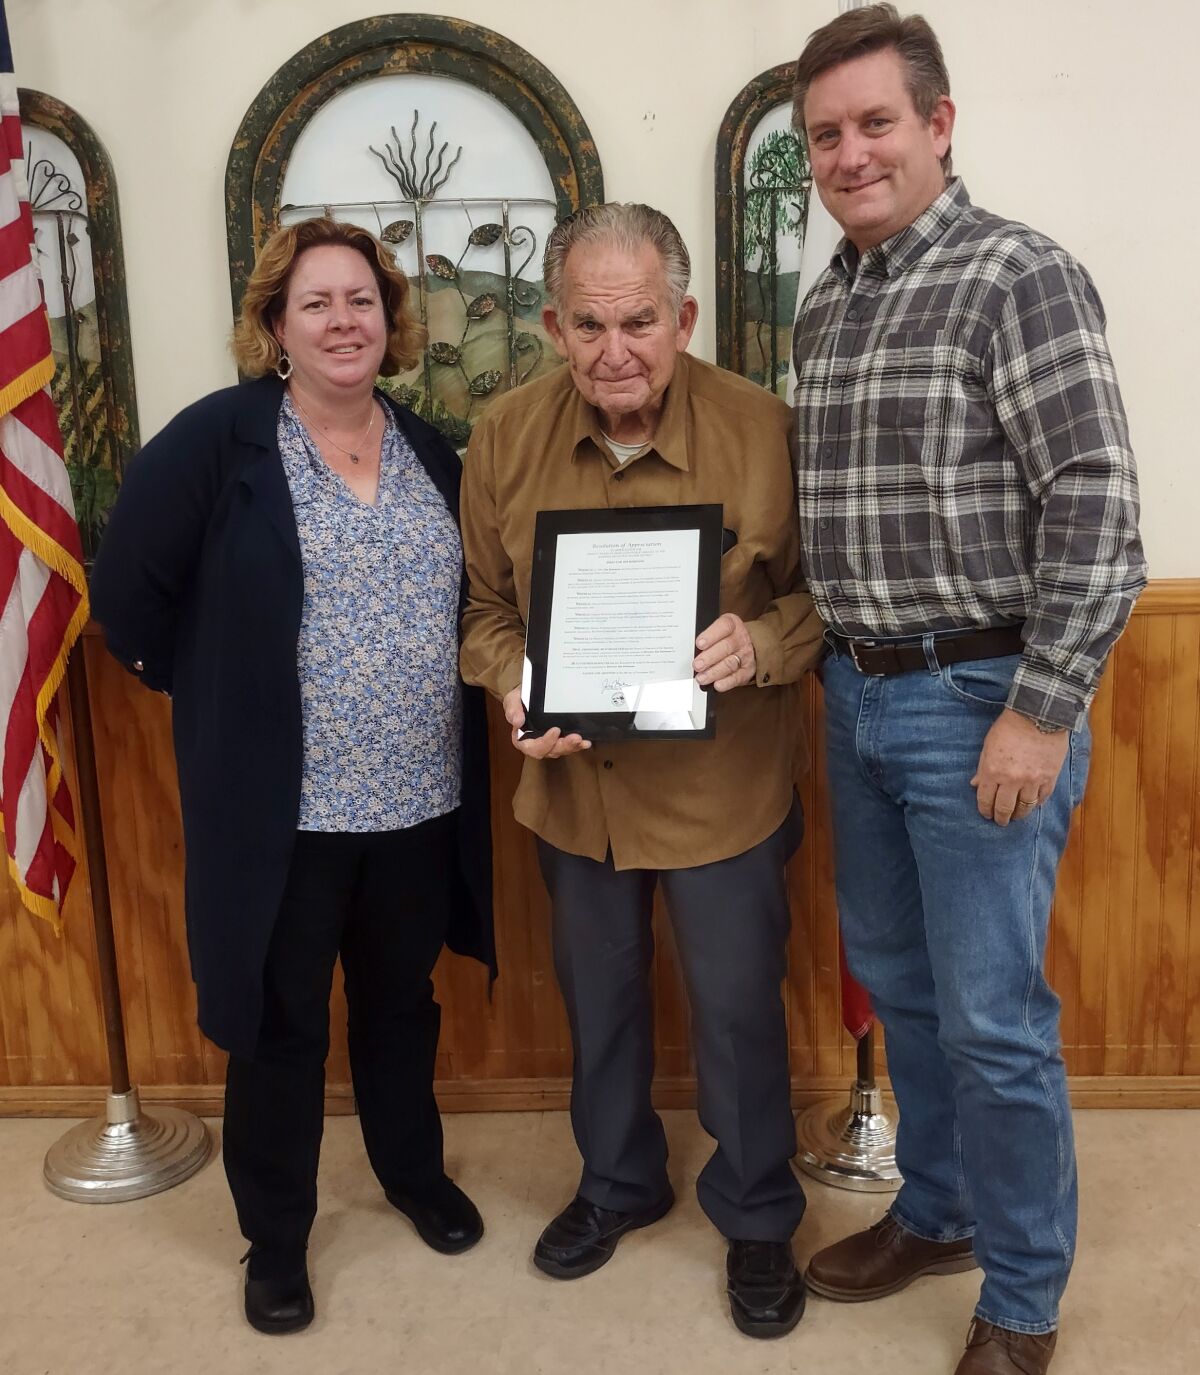 Jim Robinson, center, accepts his Resolution of Appreciation from General Manager Erica Wolski and Director Jeff Lawler.